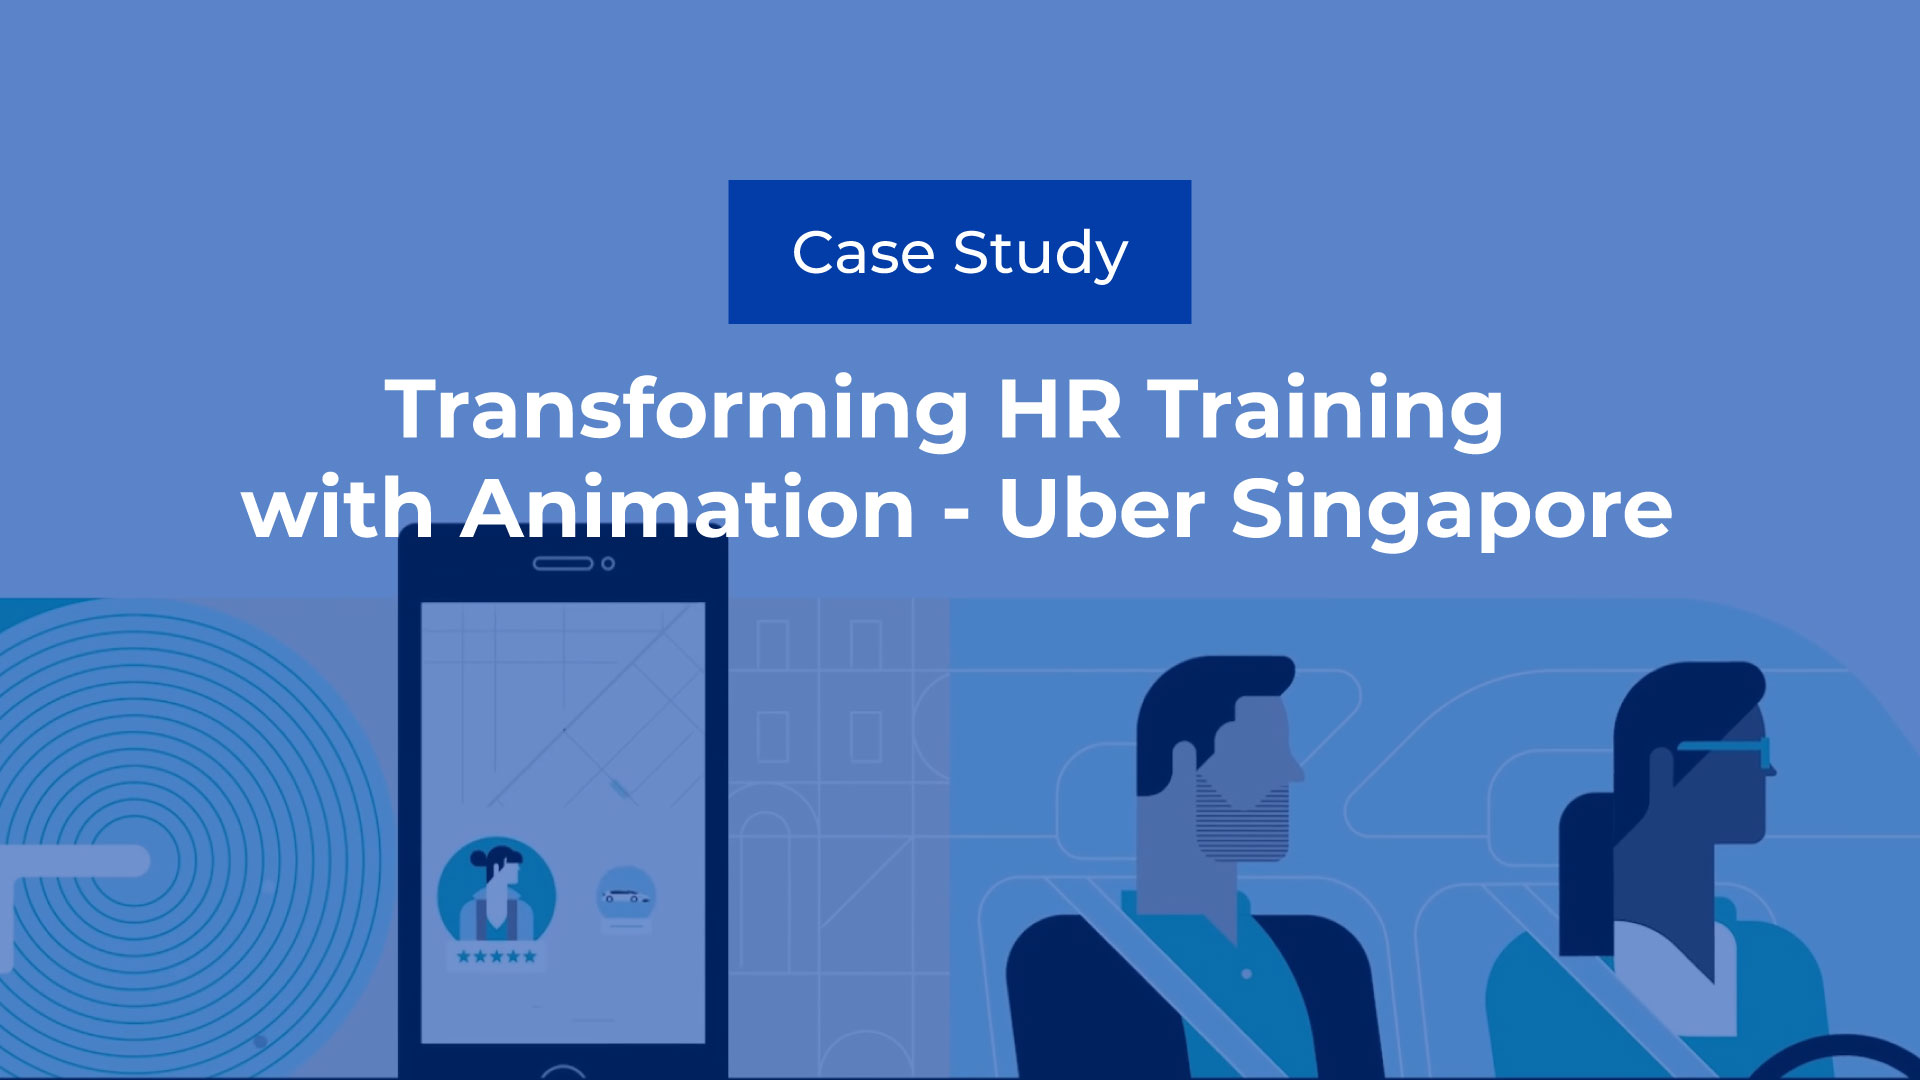 Case Study: Transforming HR Training with Animation - Uber Singapore